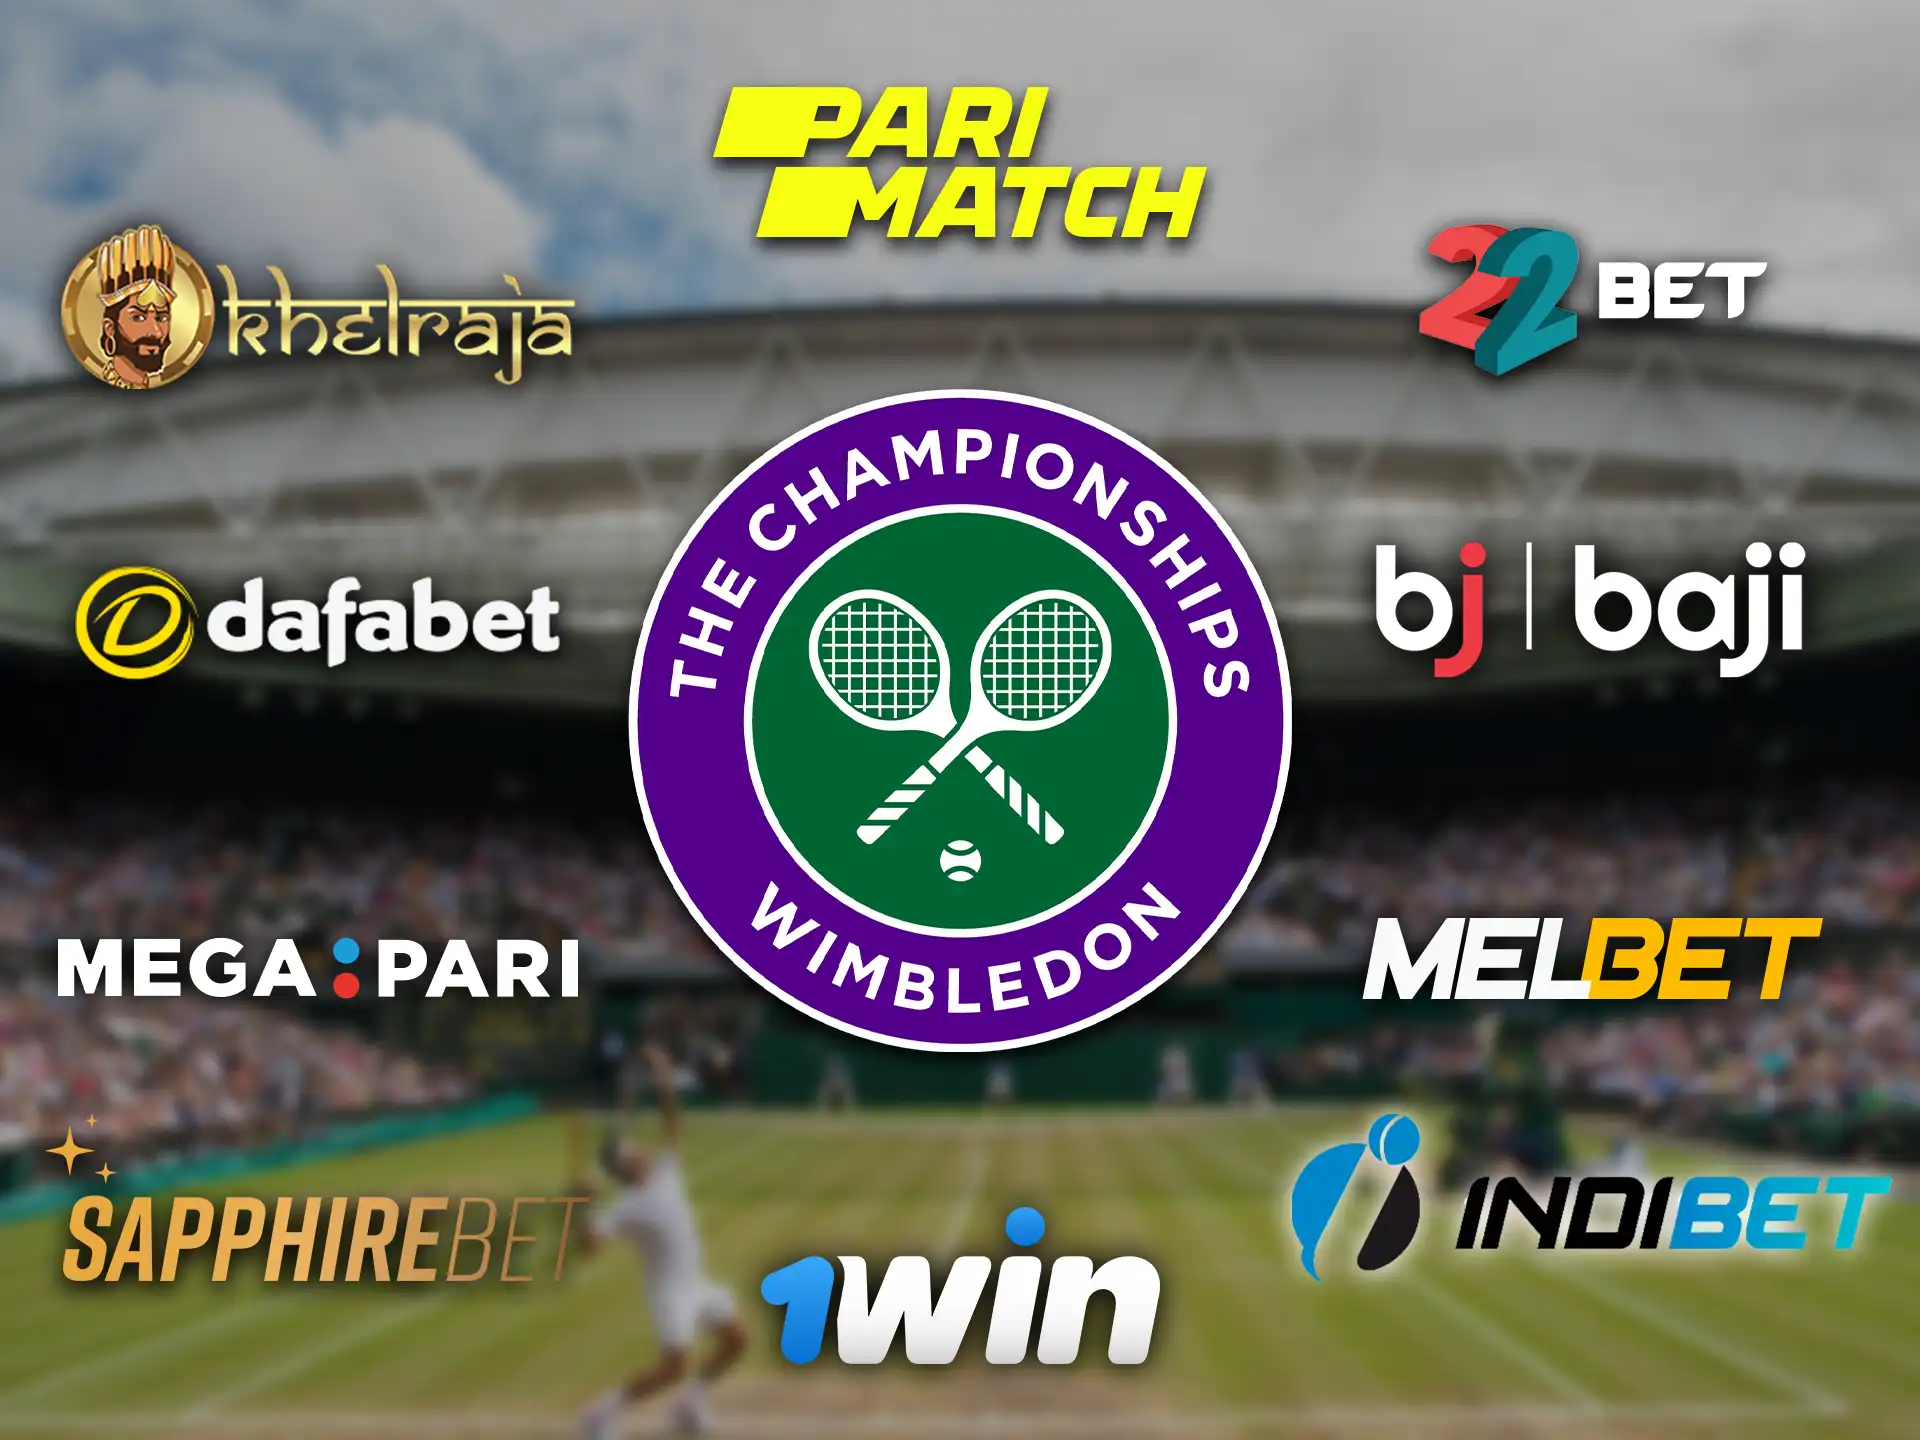 The Wimbledon tournament is present at any bookmaker listed.